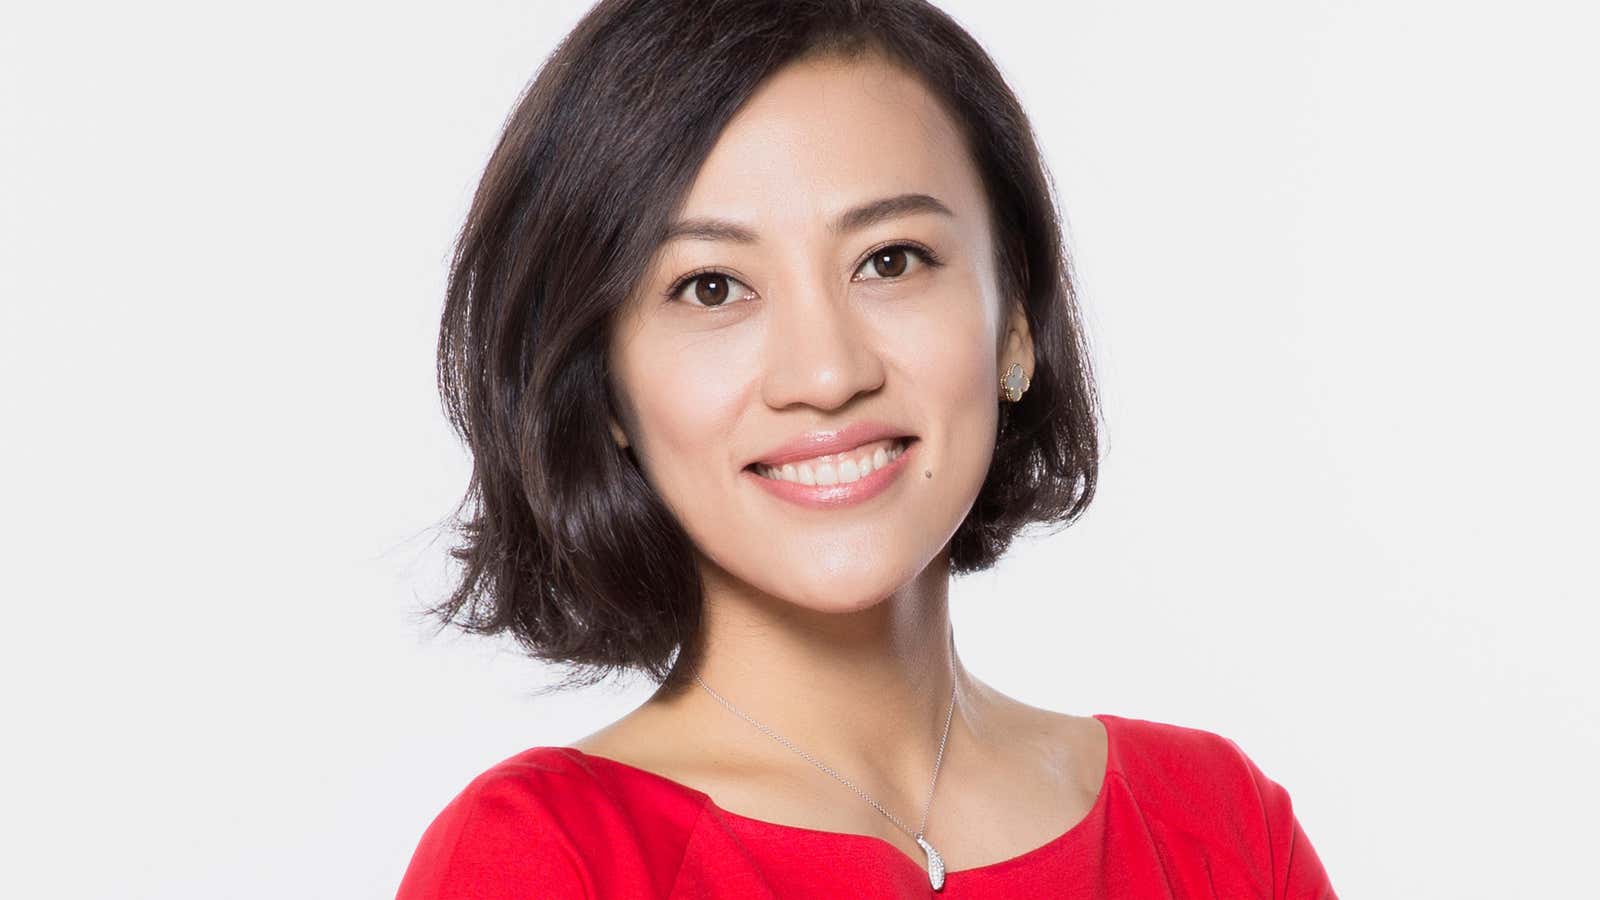 Didi Chuxing president Jean Liu’s advice for working women: “It’s supposed to be hard”